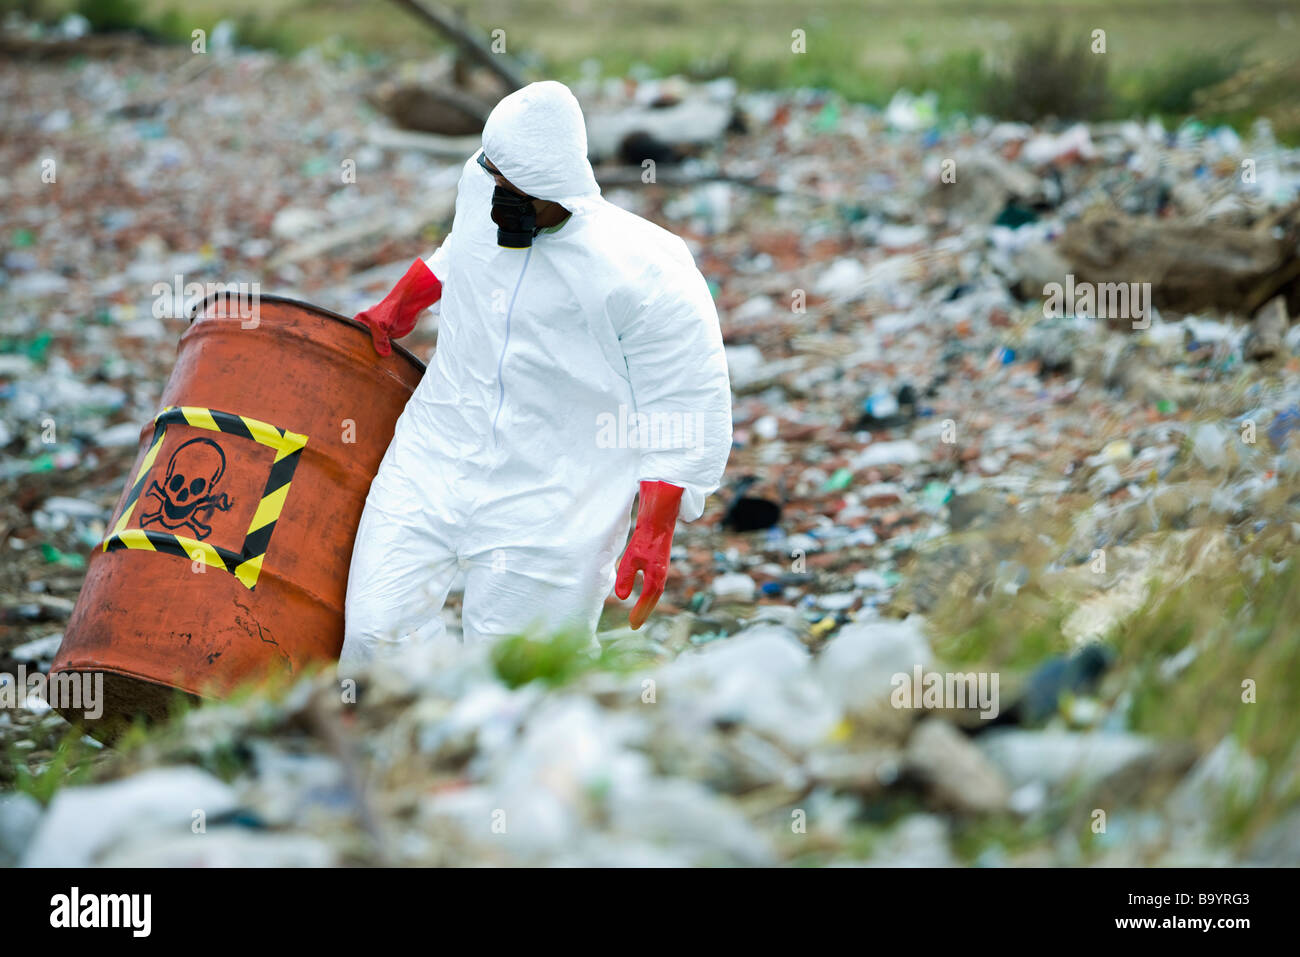 Person in protective suit carrying barrel of hazardous waste Stock Photo